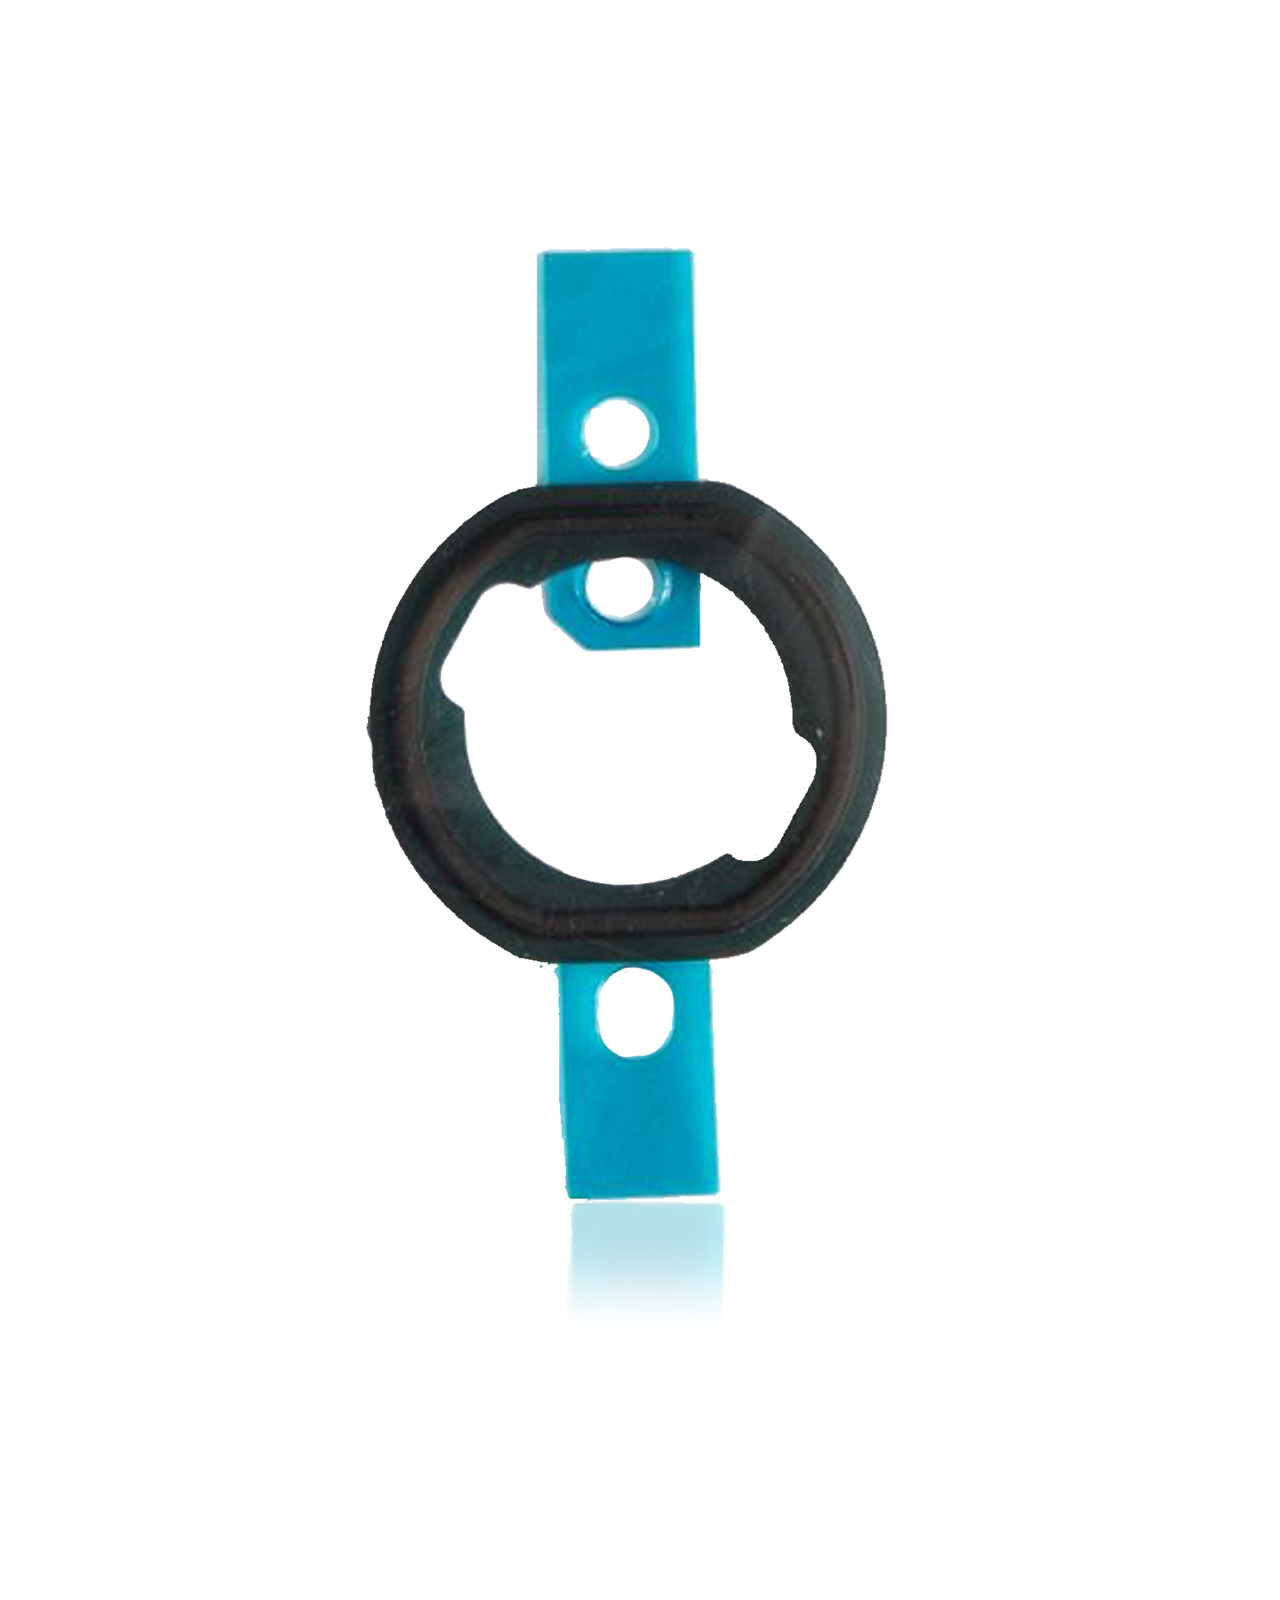 Home Button Rubber Gasket For iPad Air 1